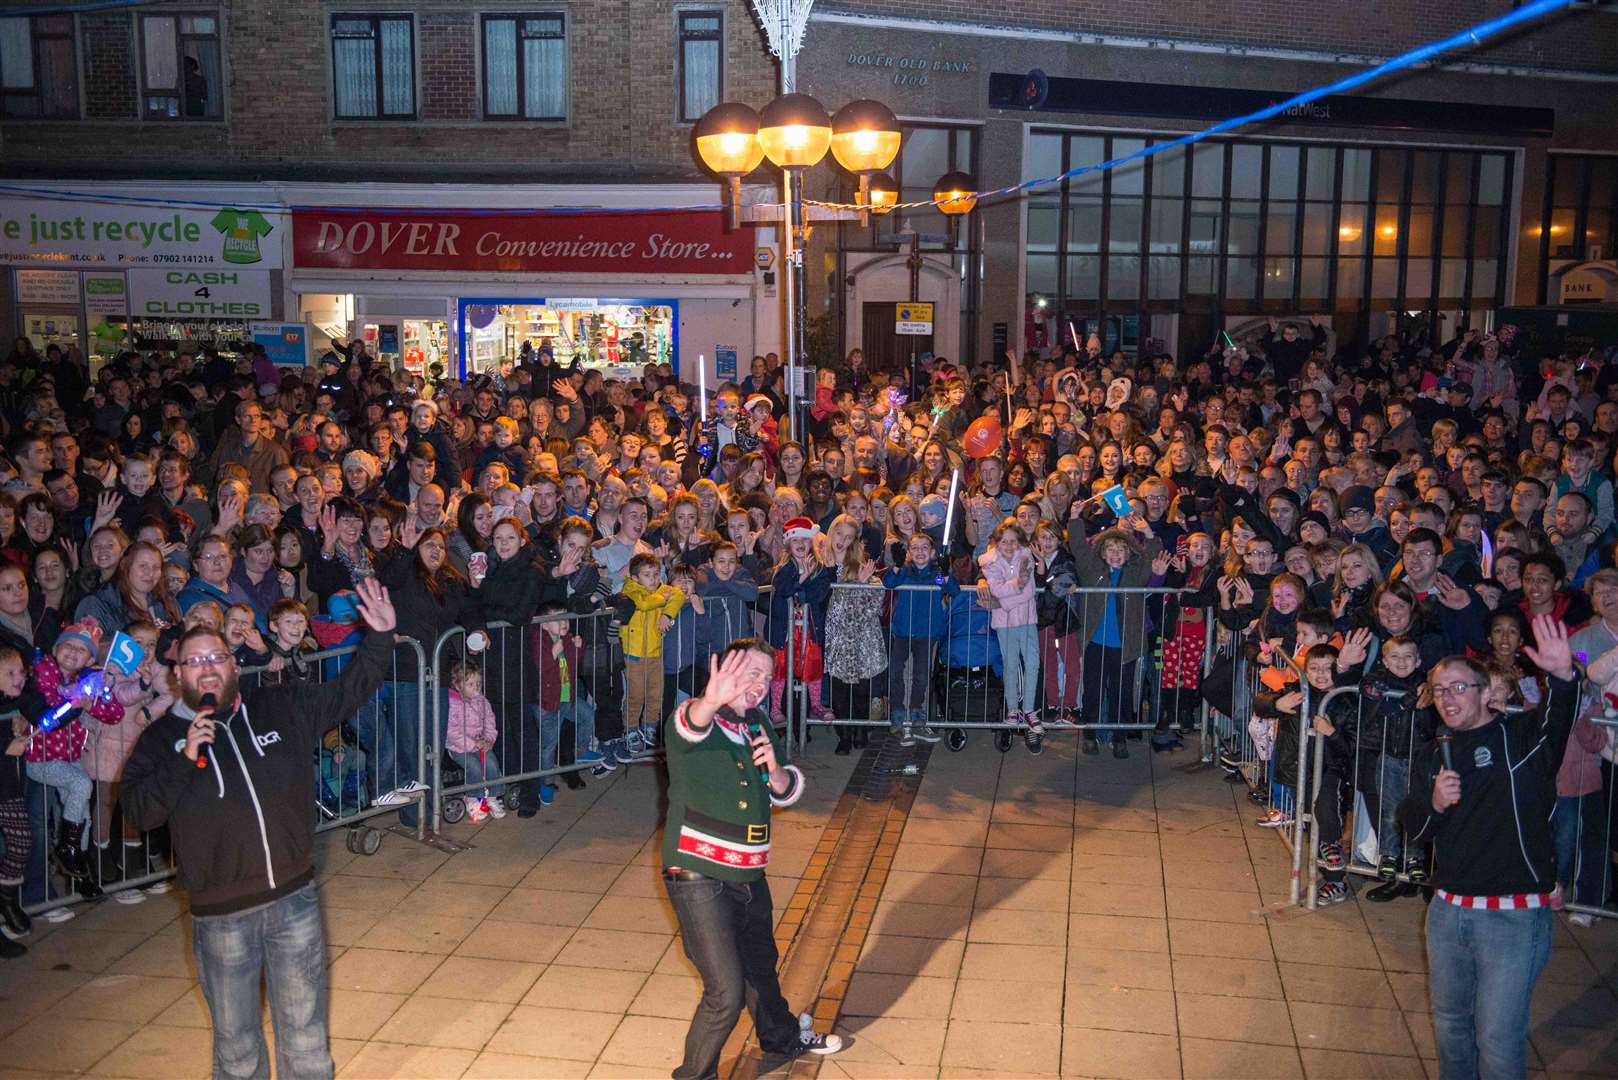 Crowds of people gathered to watch the Christmas lights being switched on